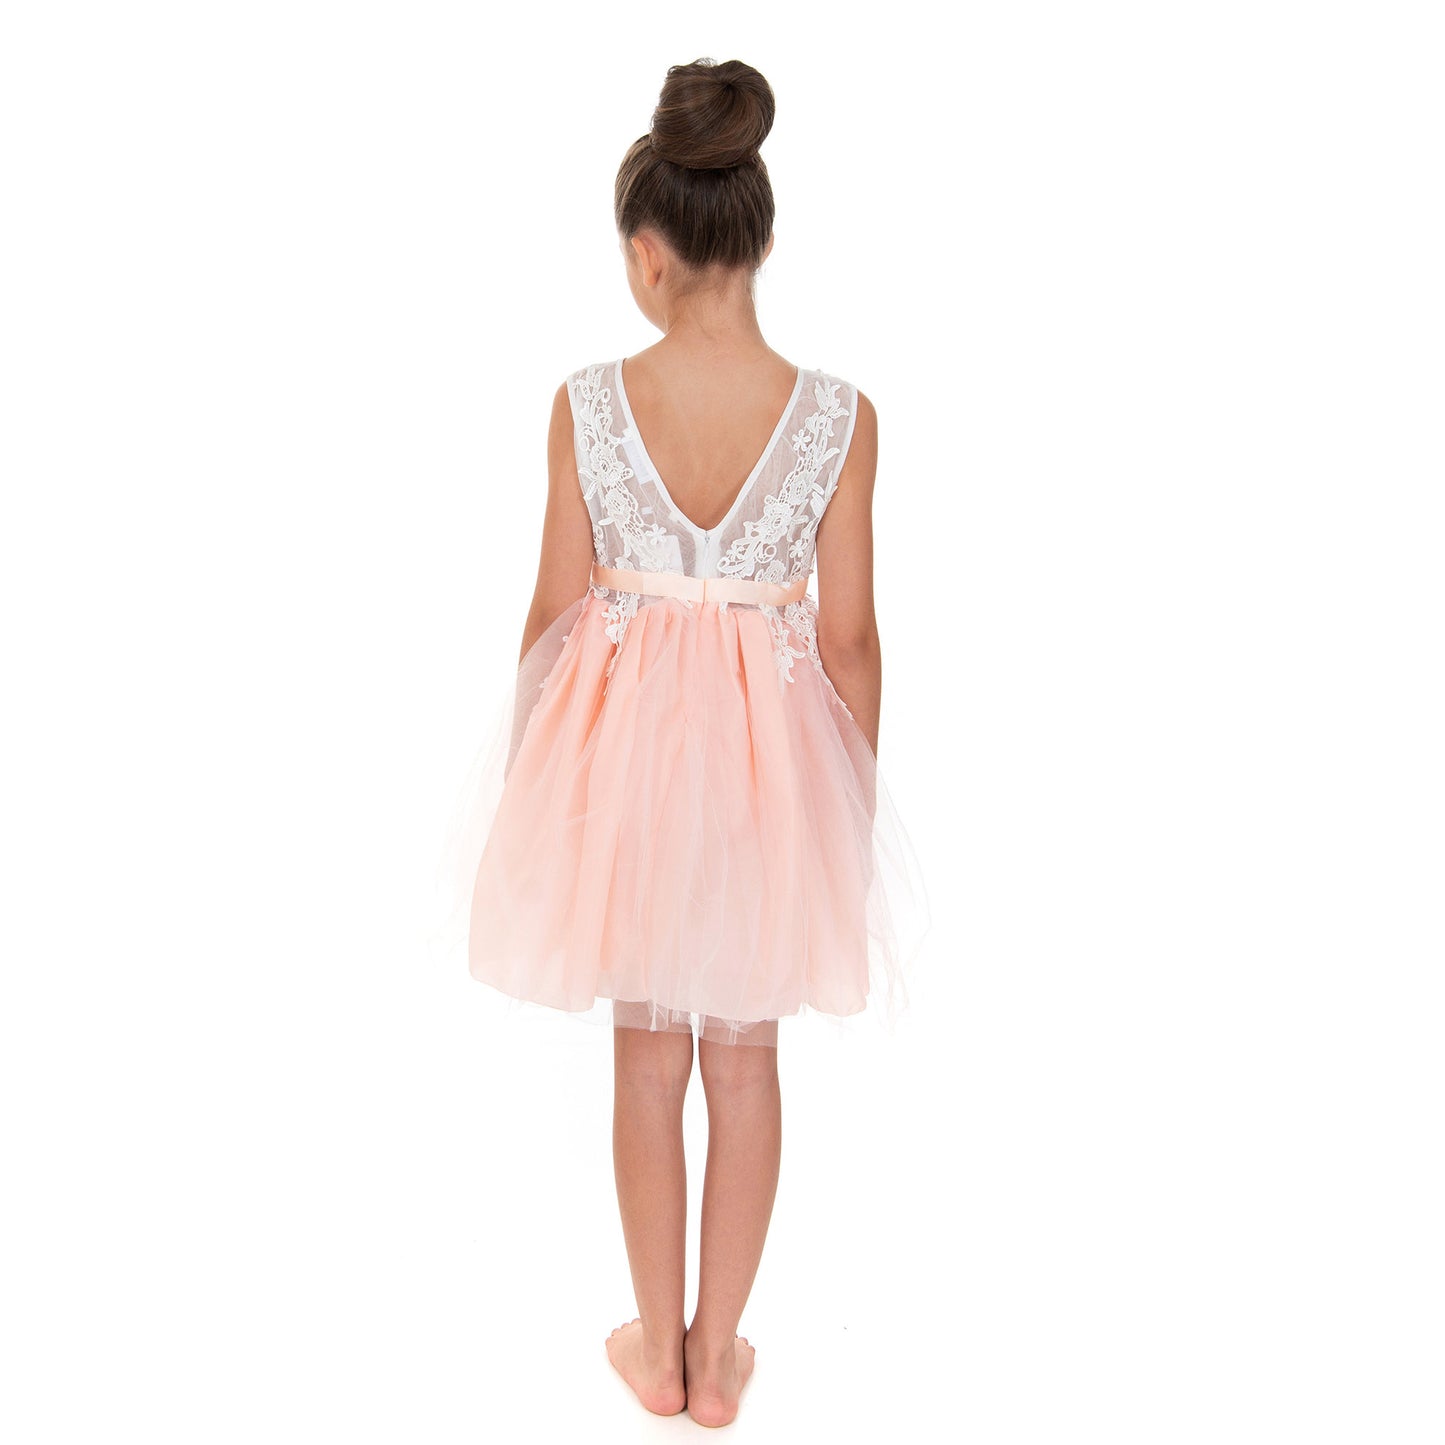 Peach and White Lace Dress